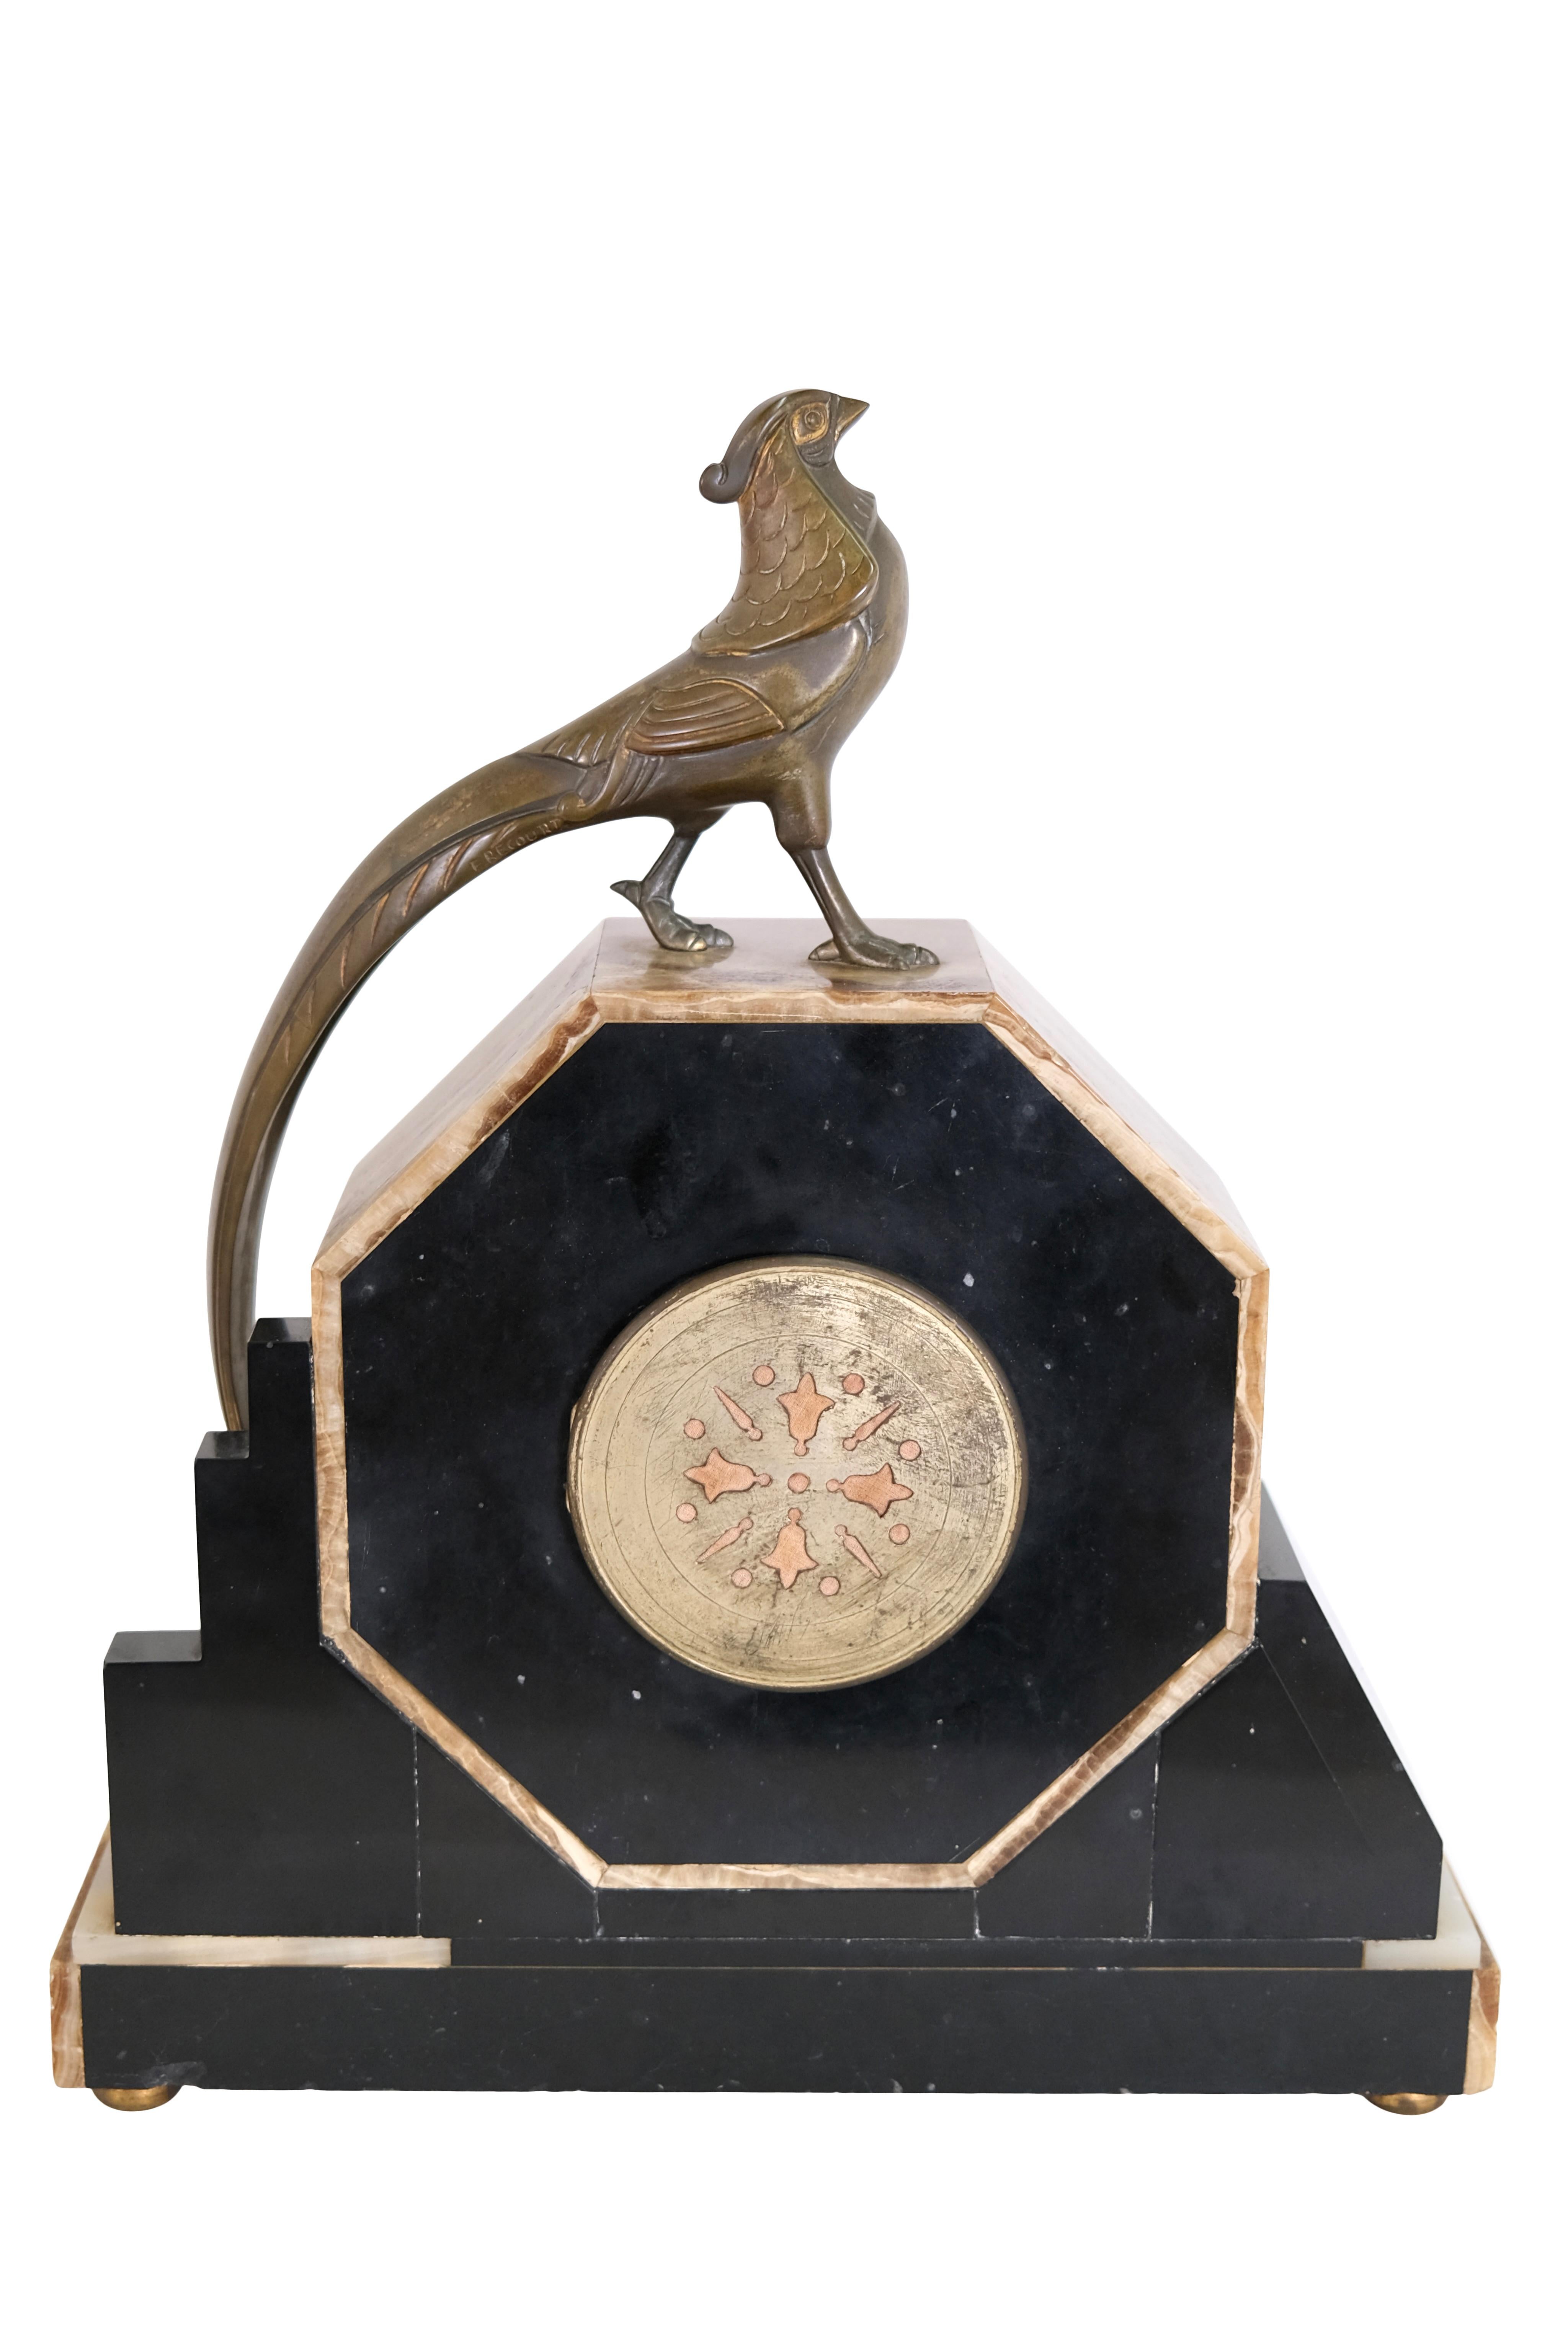 20th Century 1930s Art Deco Marble Mantel Clock with Bronze Birds by Maurice Frecourt For Sale